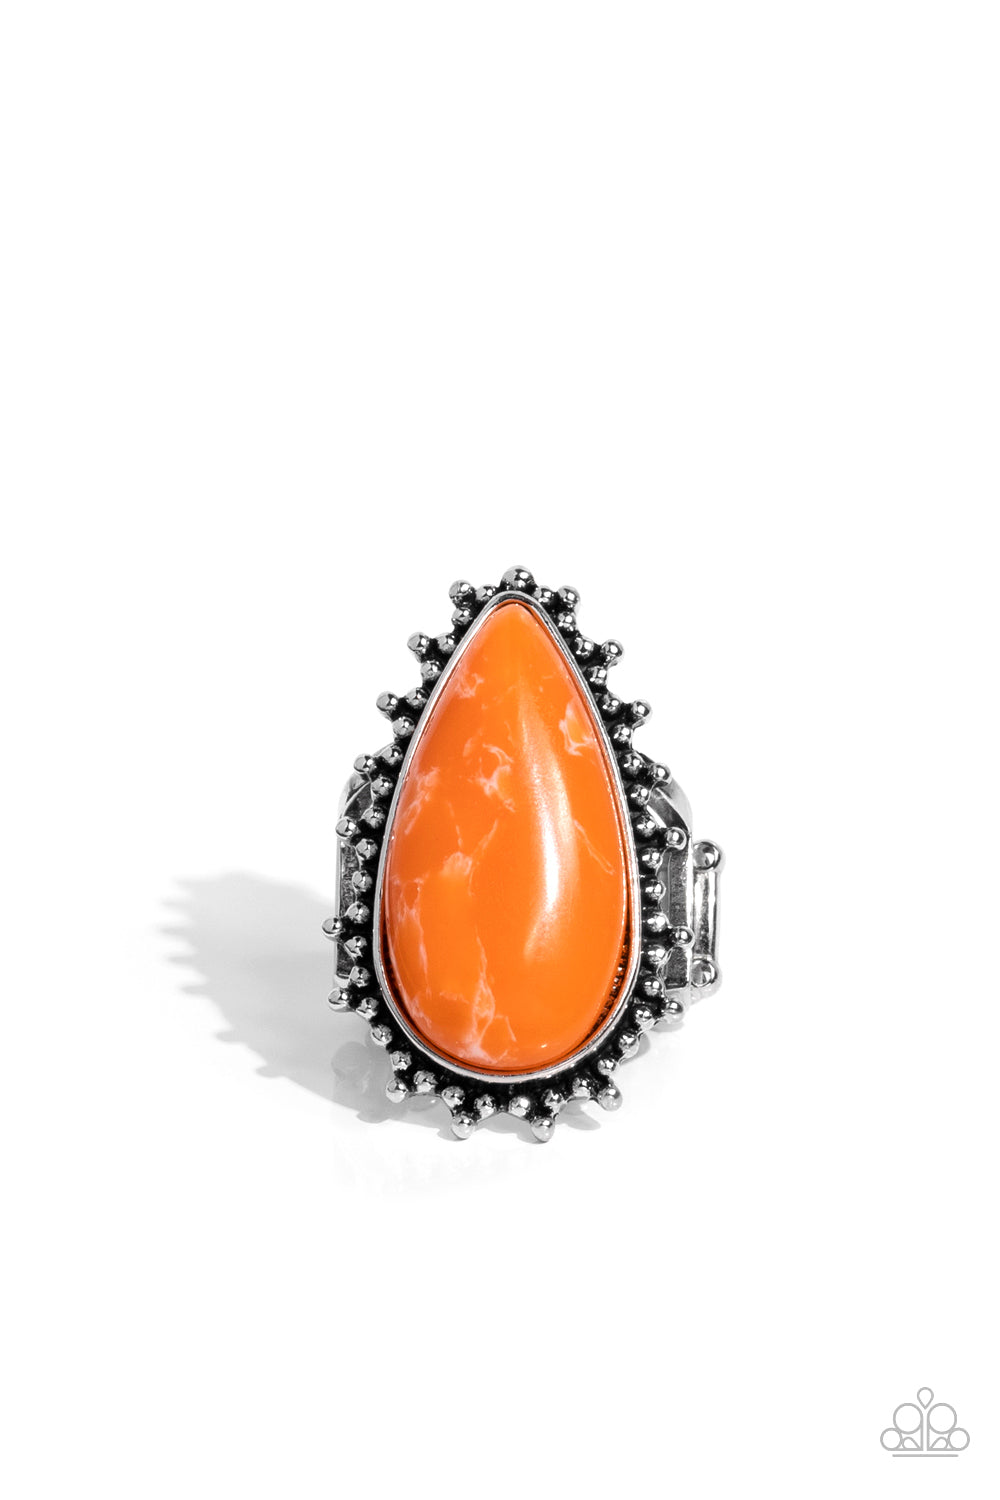 Down-to-Earth Essence - Orange Ring - Paparazzi Accessories 